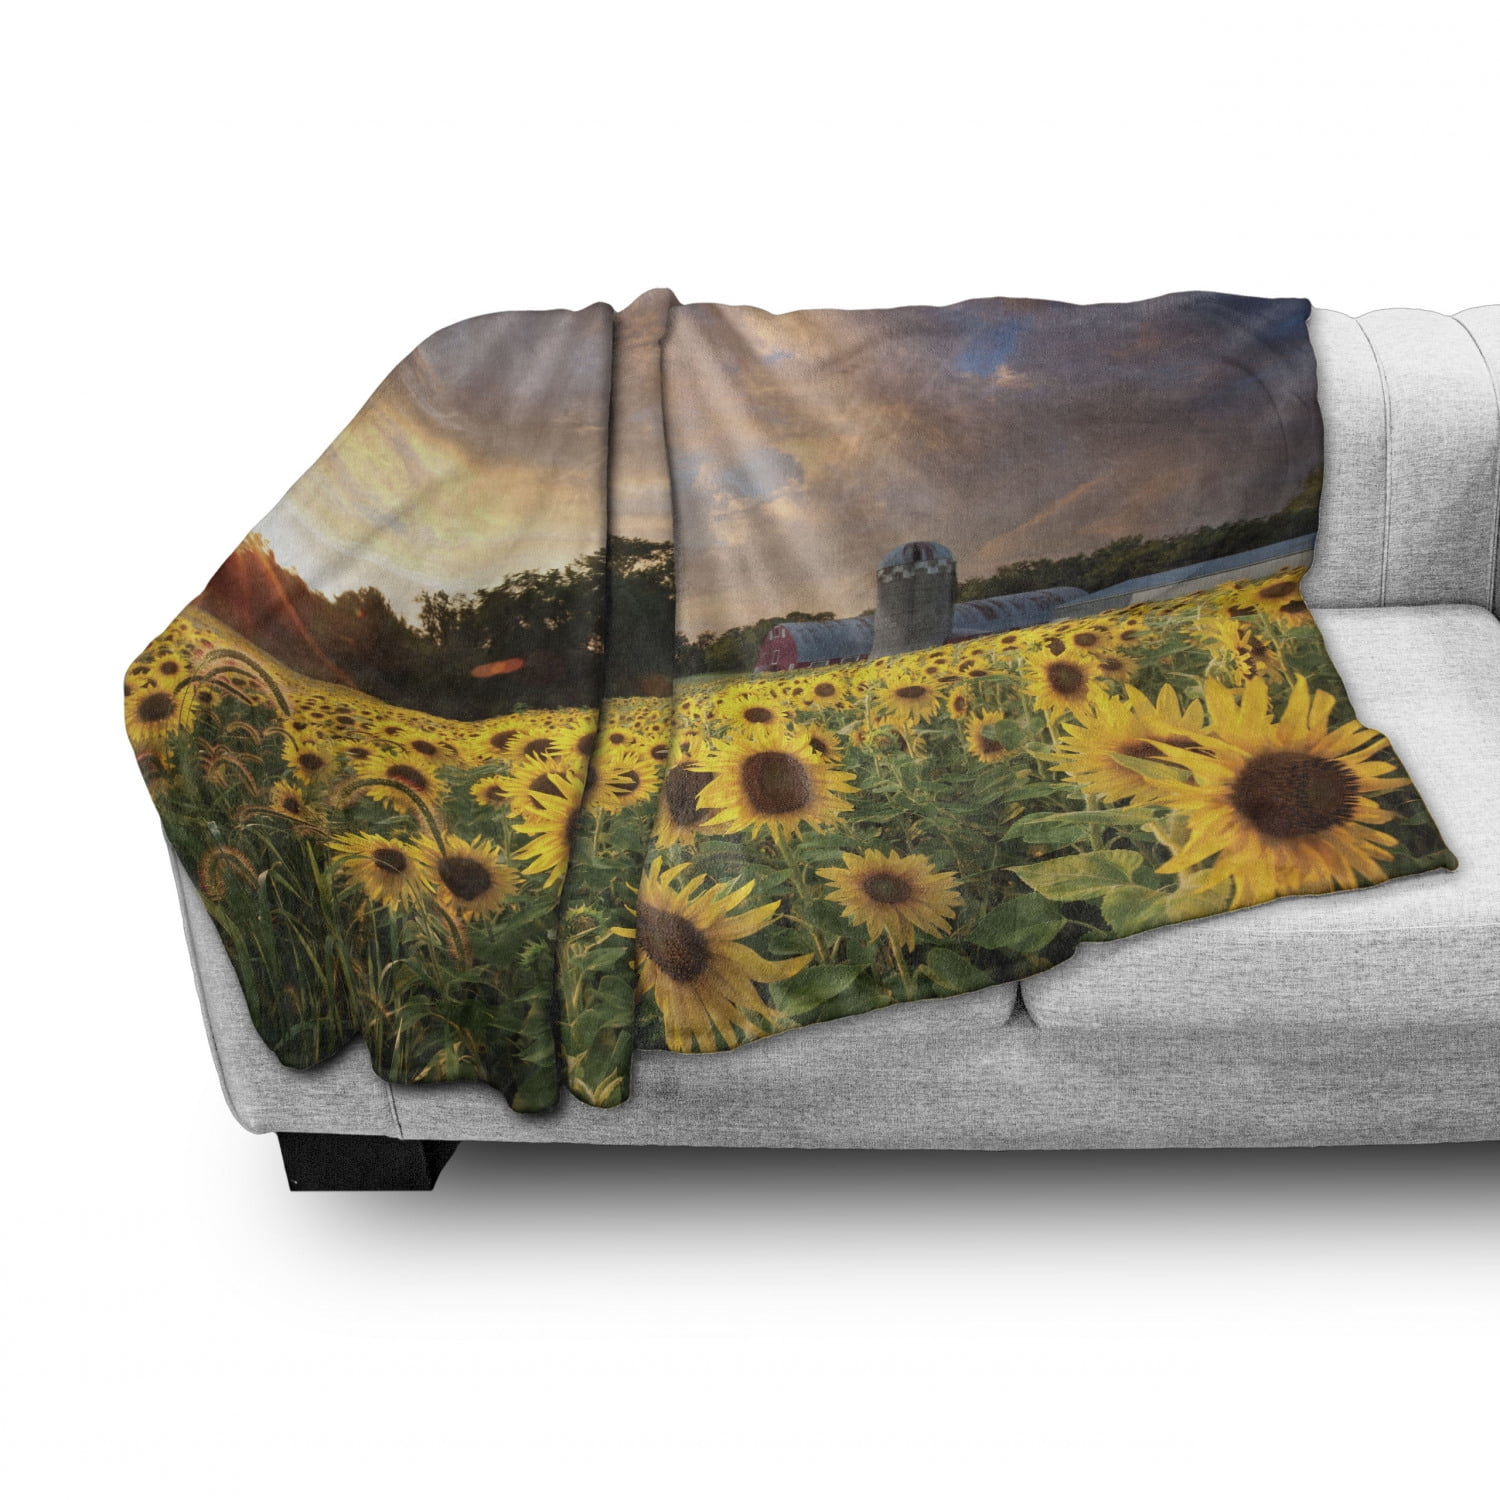 Multicolor Ambesonne Minnesota Throw Blanket Field of Yellow Sunflowers in a Minnesota Farmland Below a Dramatic Sunset Sky Flannel Fleece Accent Piece Soft Couch Cover for Adults 60 x 80